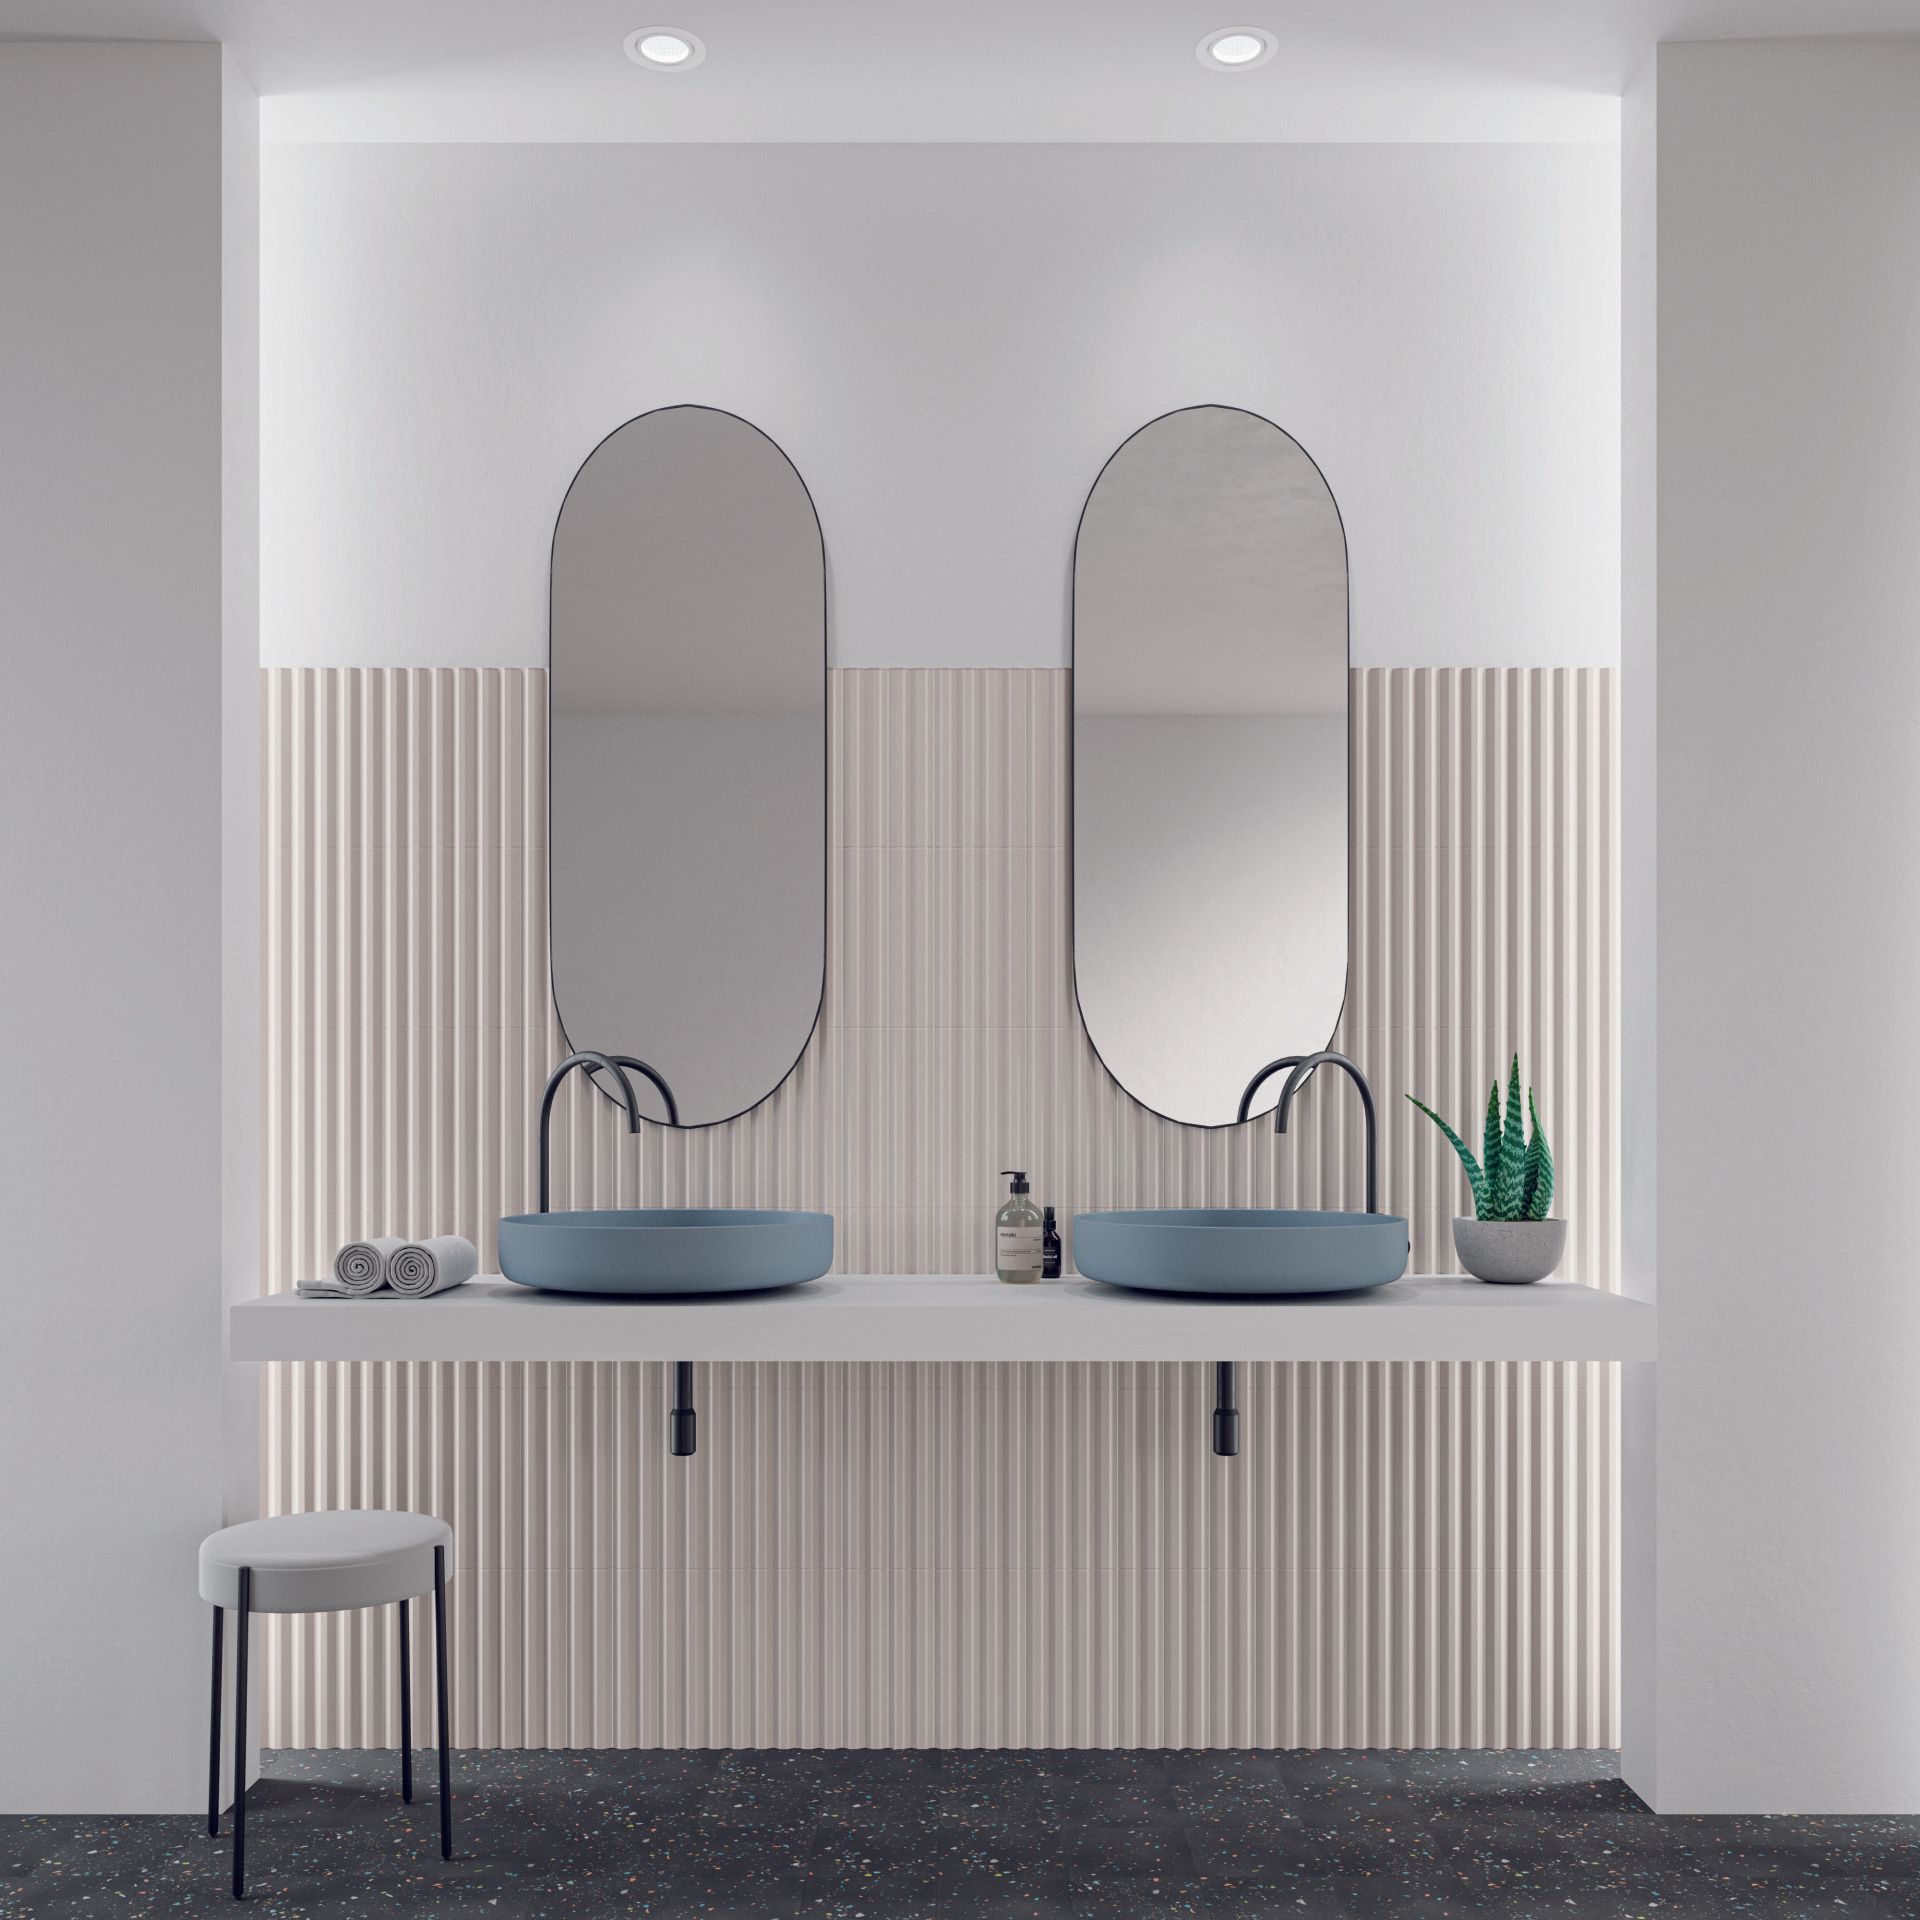 A collection of 3D textured wall tiles in pastel tones, ideal for feature walls, kitchen island surrounds, bar fronts and reception desk cladding. Often referred to as fluted or ribbed tiles